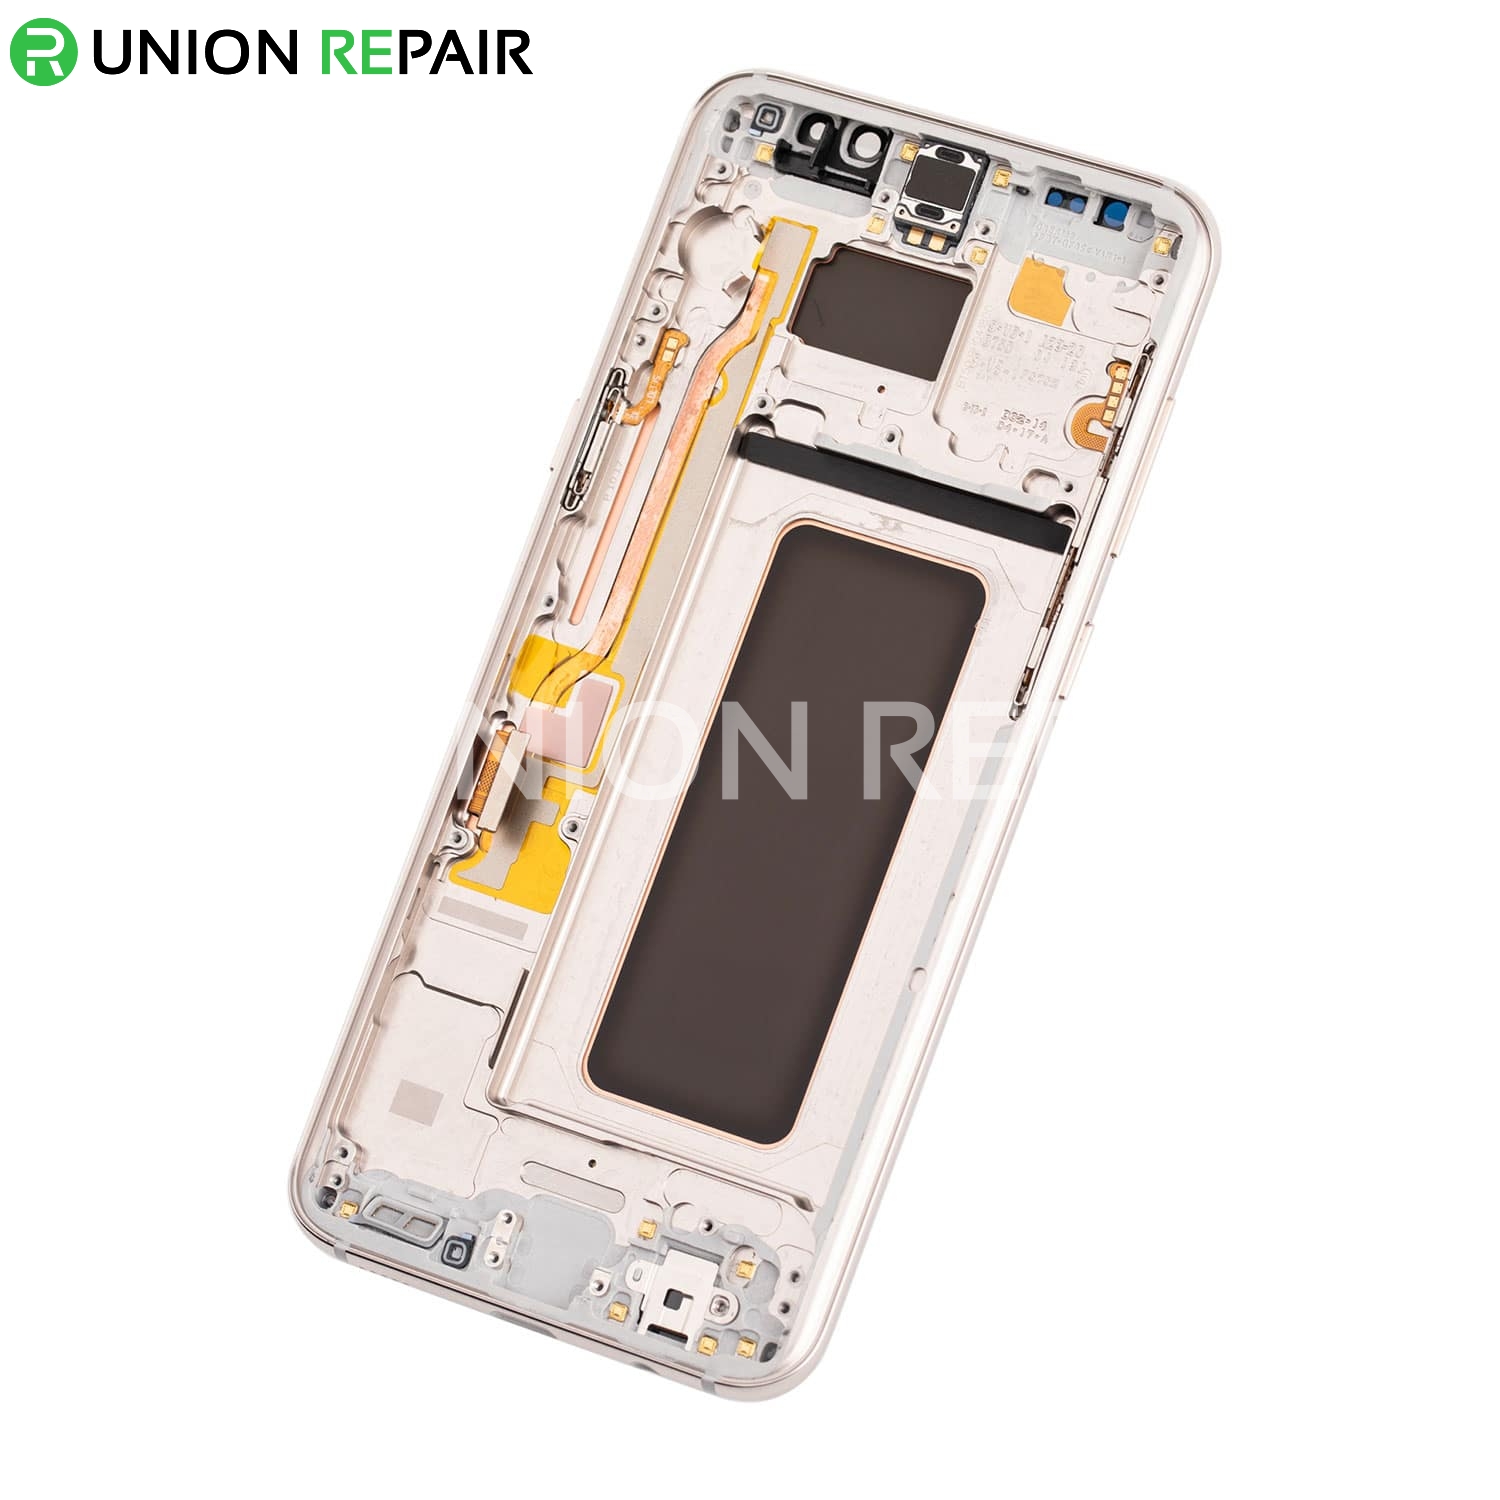 Replacement for Samsung Galaxy S8 Plus SM-G955 LCD Screen Assembly - Maple Gold